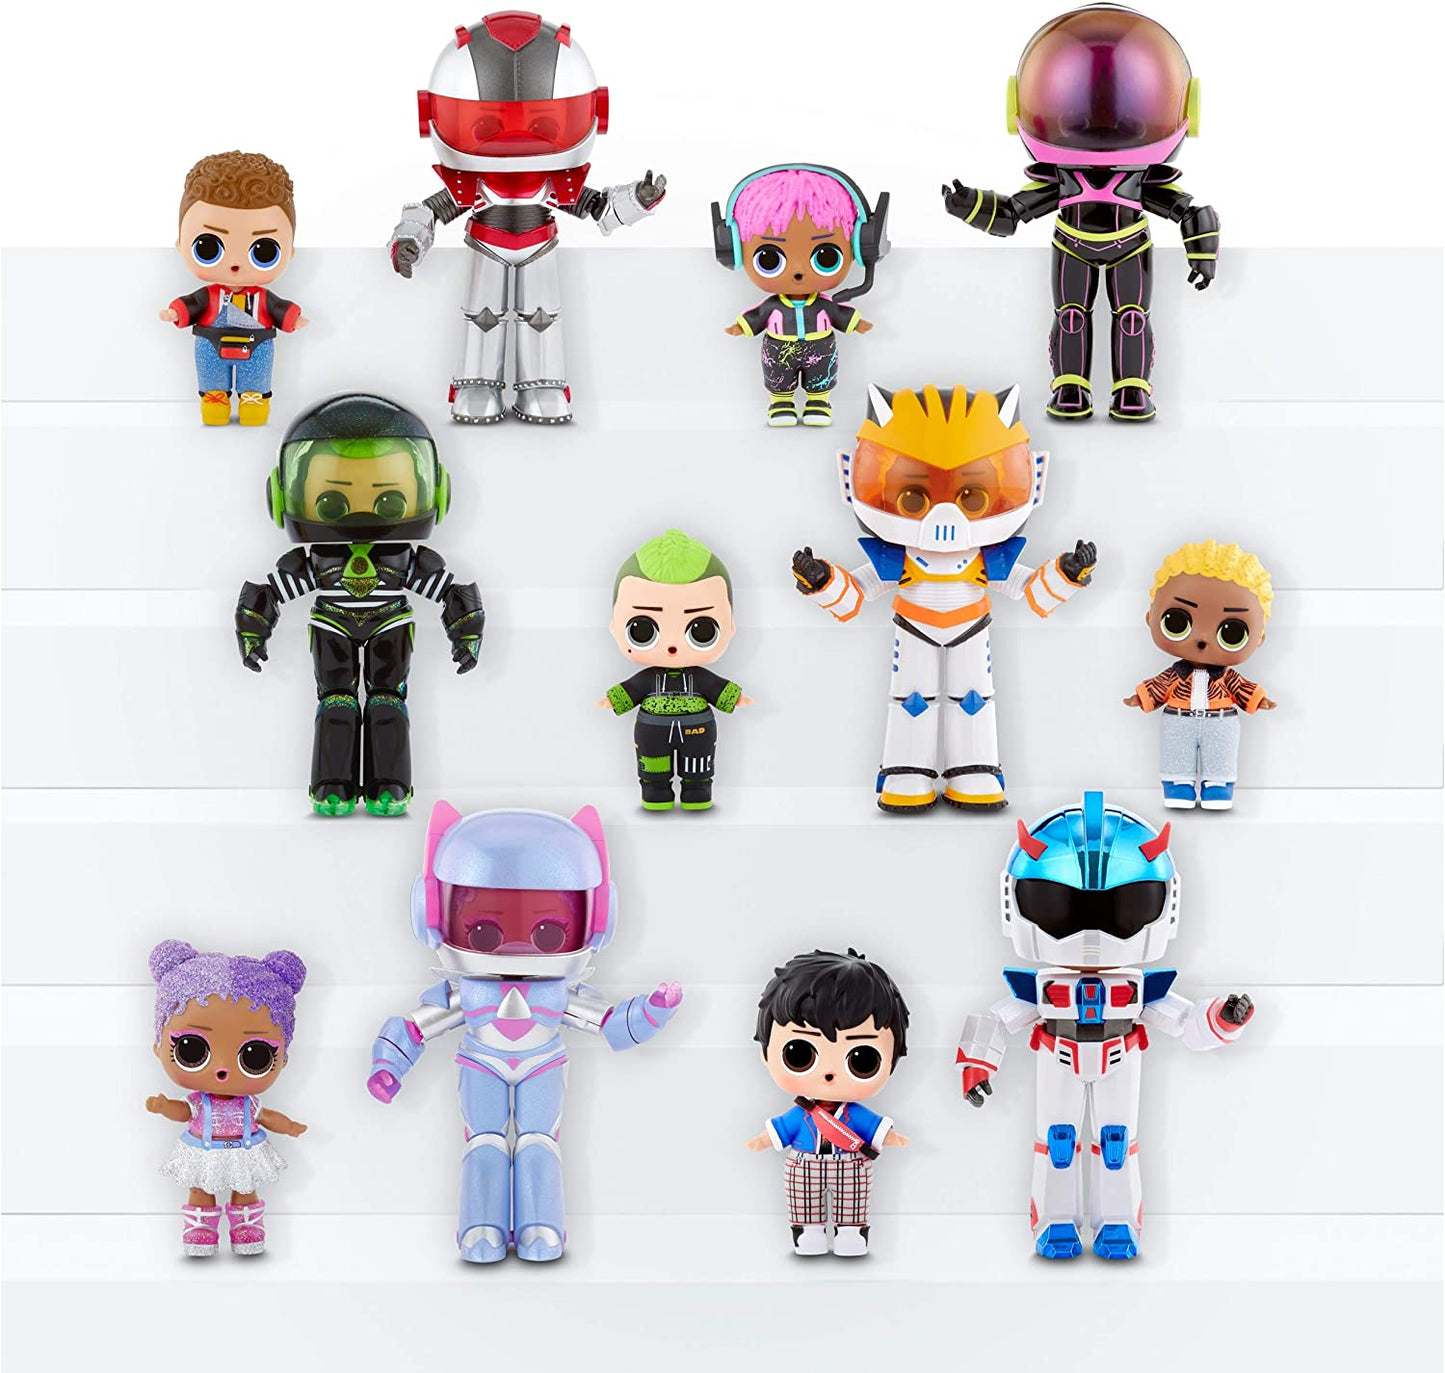 LOL Surprise Boys Arcade Heroes Action Figure Doll with 15 Surprises Including Hero Suit and Boy Doll or Ultra-Rare Girl Doll, Shoes, Accessories, Trading Card